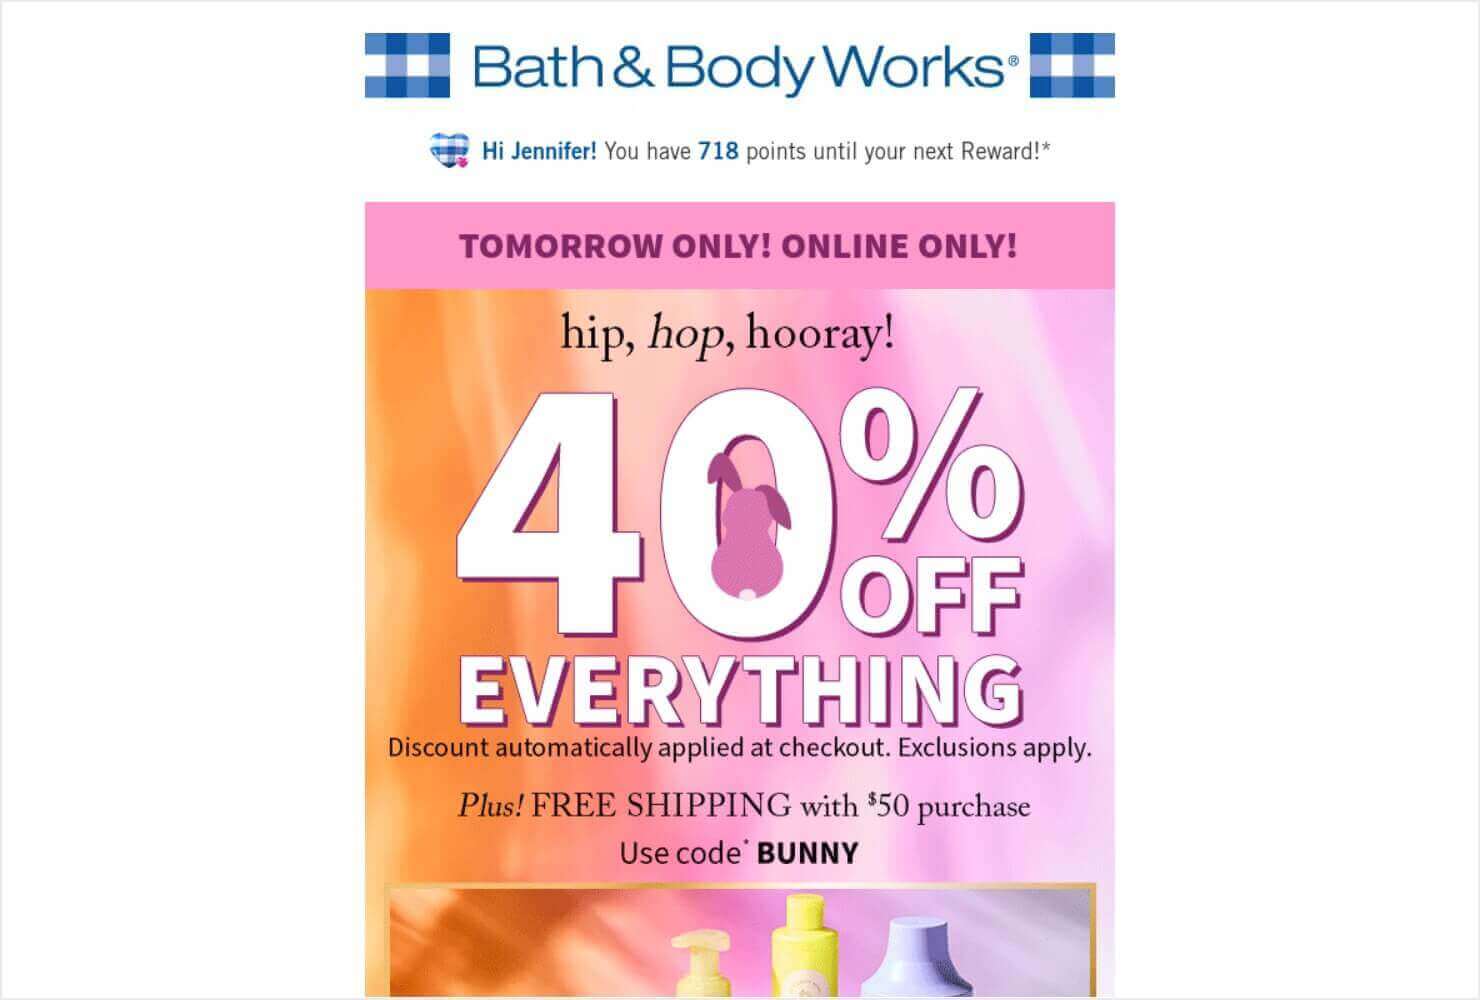 Email from Bath & BodyWorks. It has a large pink graphic that says "Tomorrow Only! Online Only! Hip, hop, hooray! 40% Off Everything" There is a bunny inside the 0 in 40%, and there are more details about the sale.